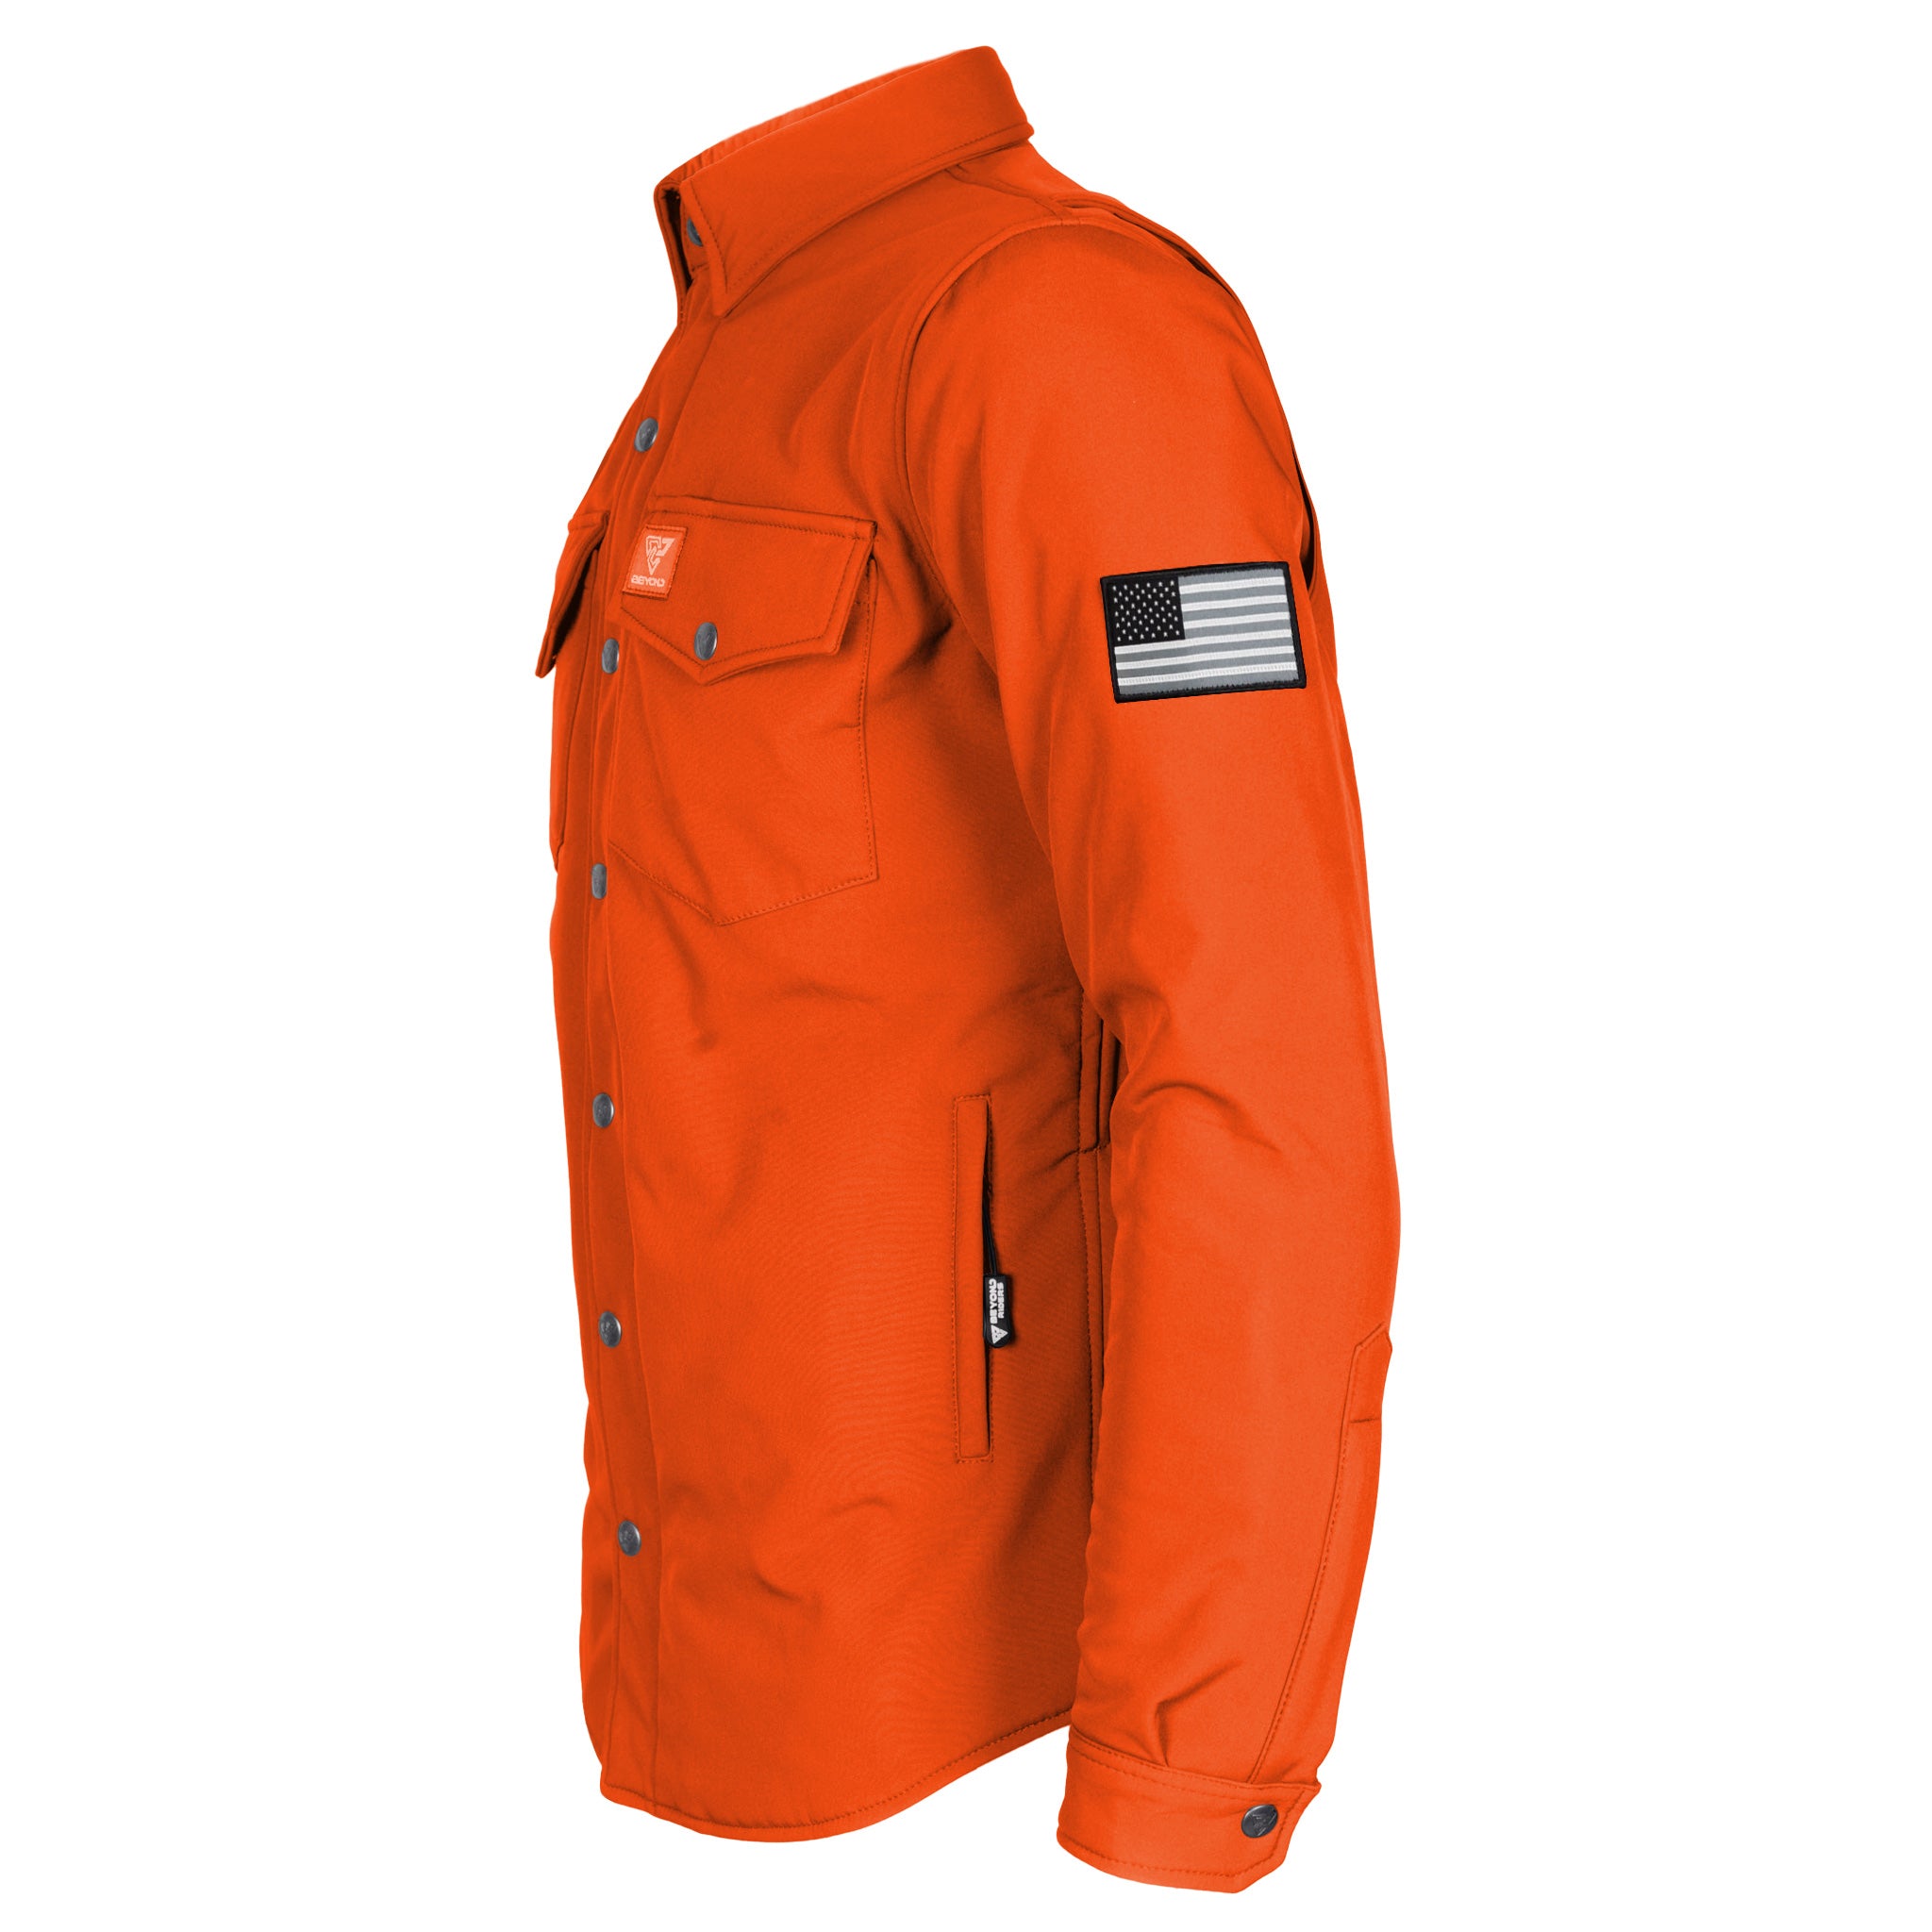 Protective SoftShell Winter Jacket for Men - Orange Matte with Pads